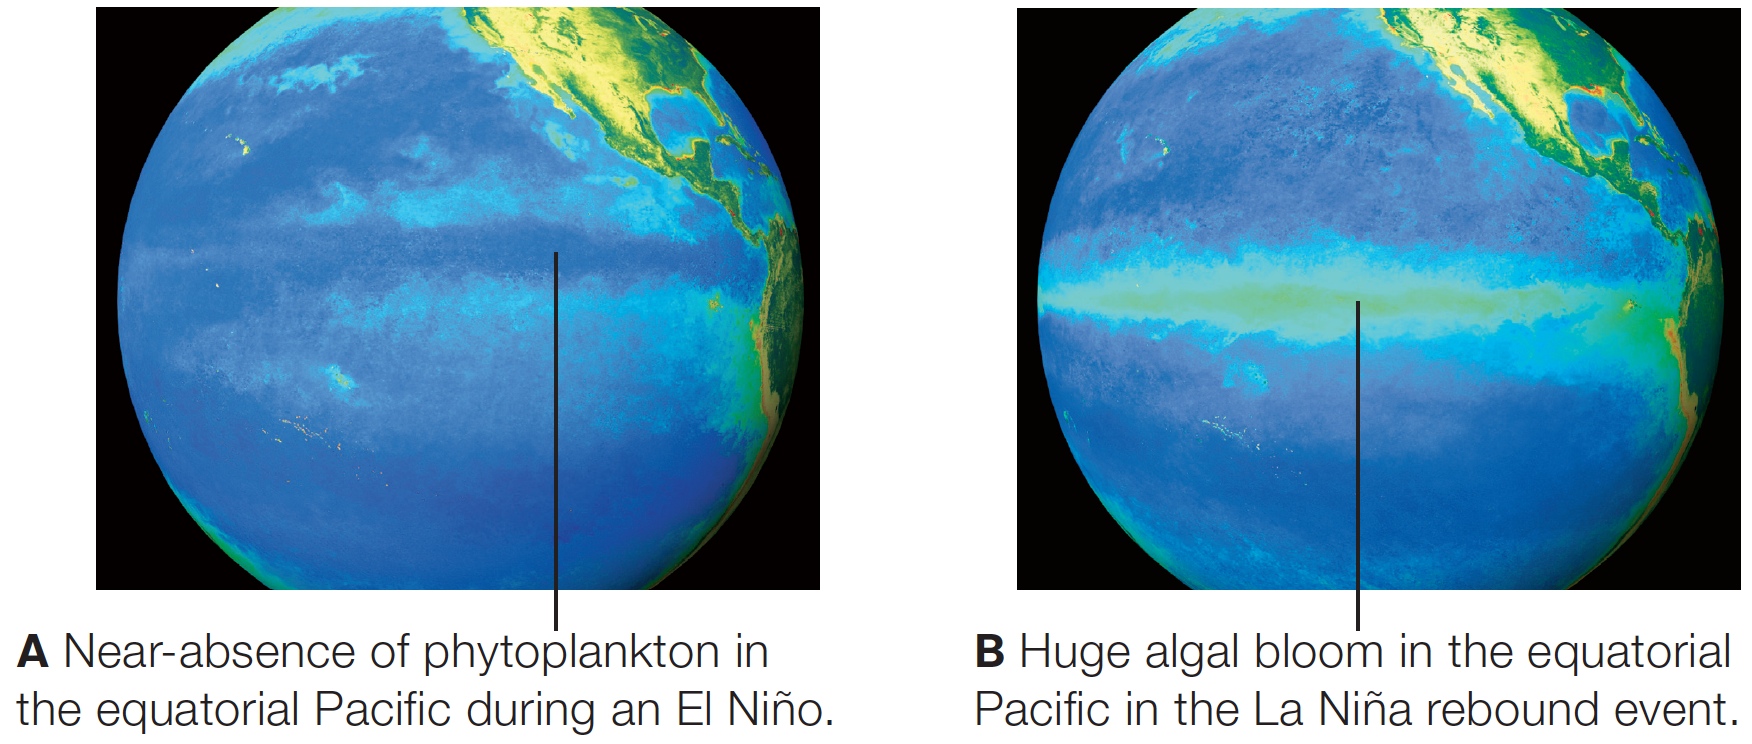 Satellite data on primary productivity in the equatorial Pacific Ocean